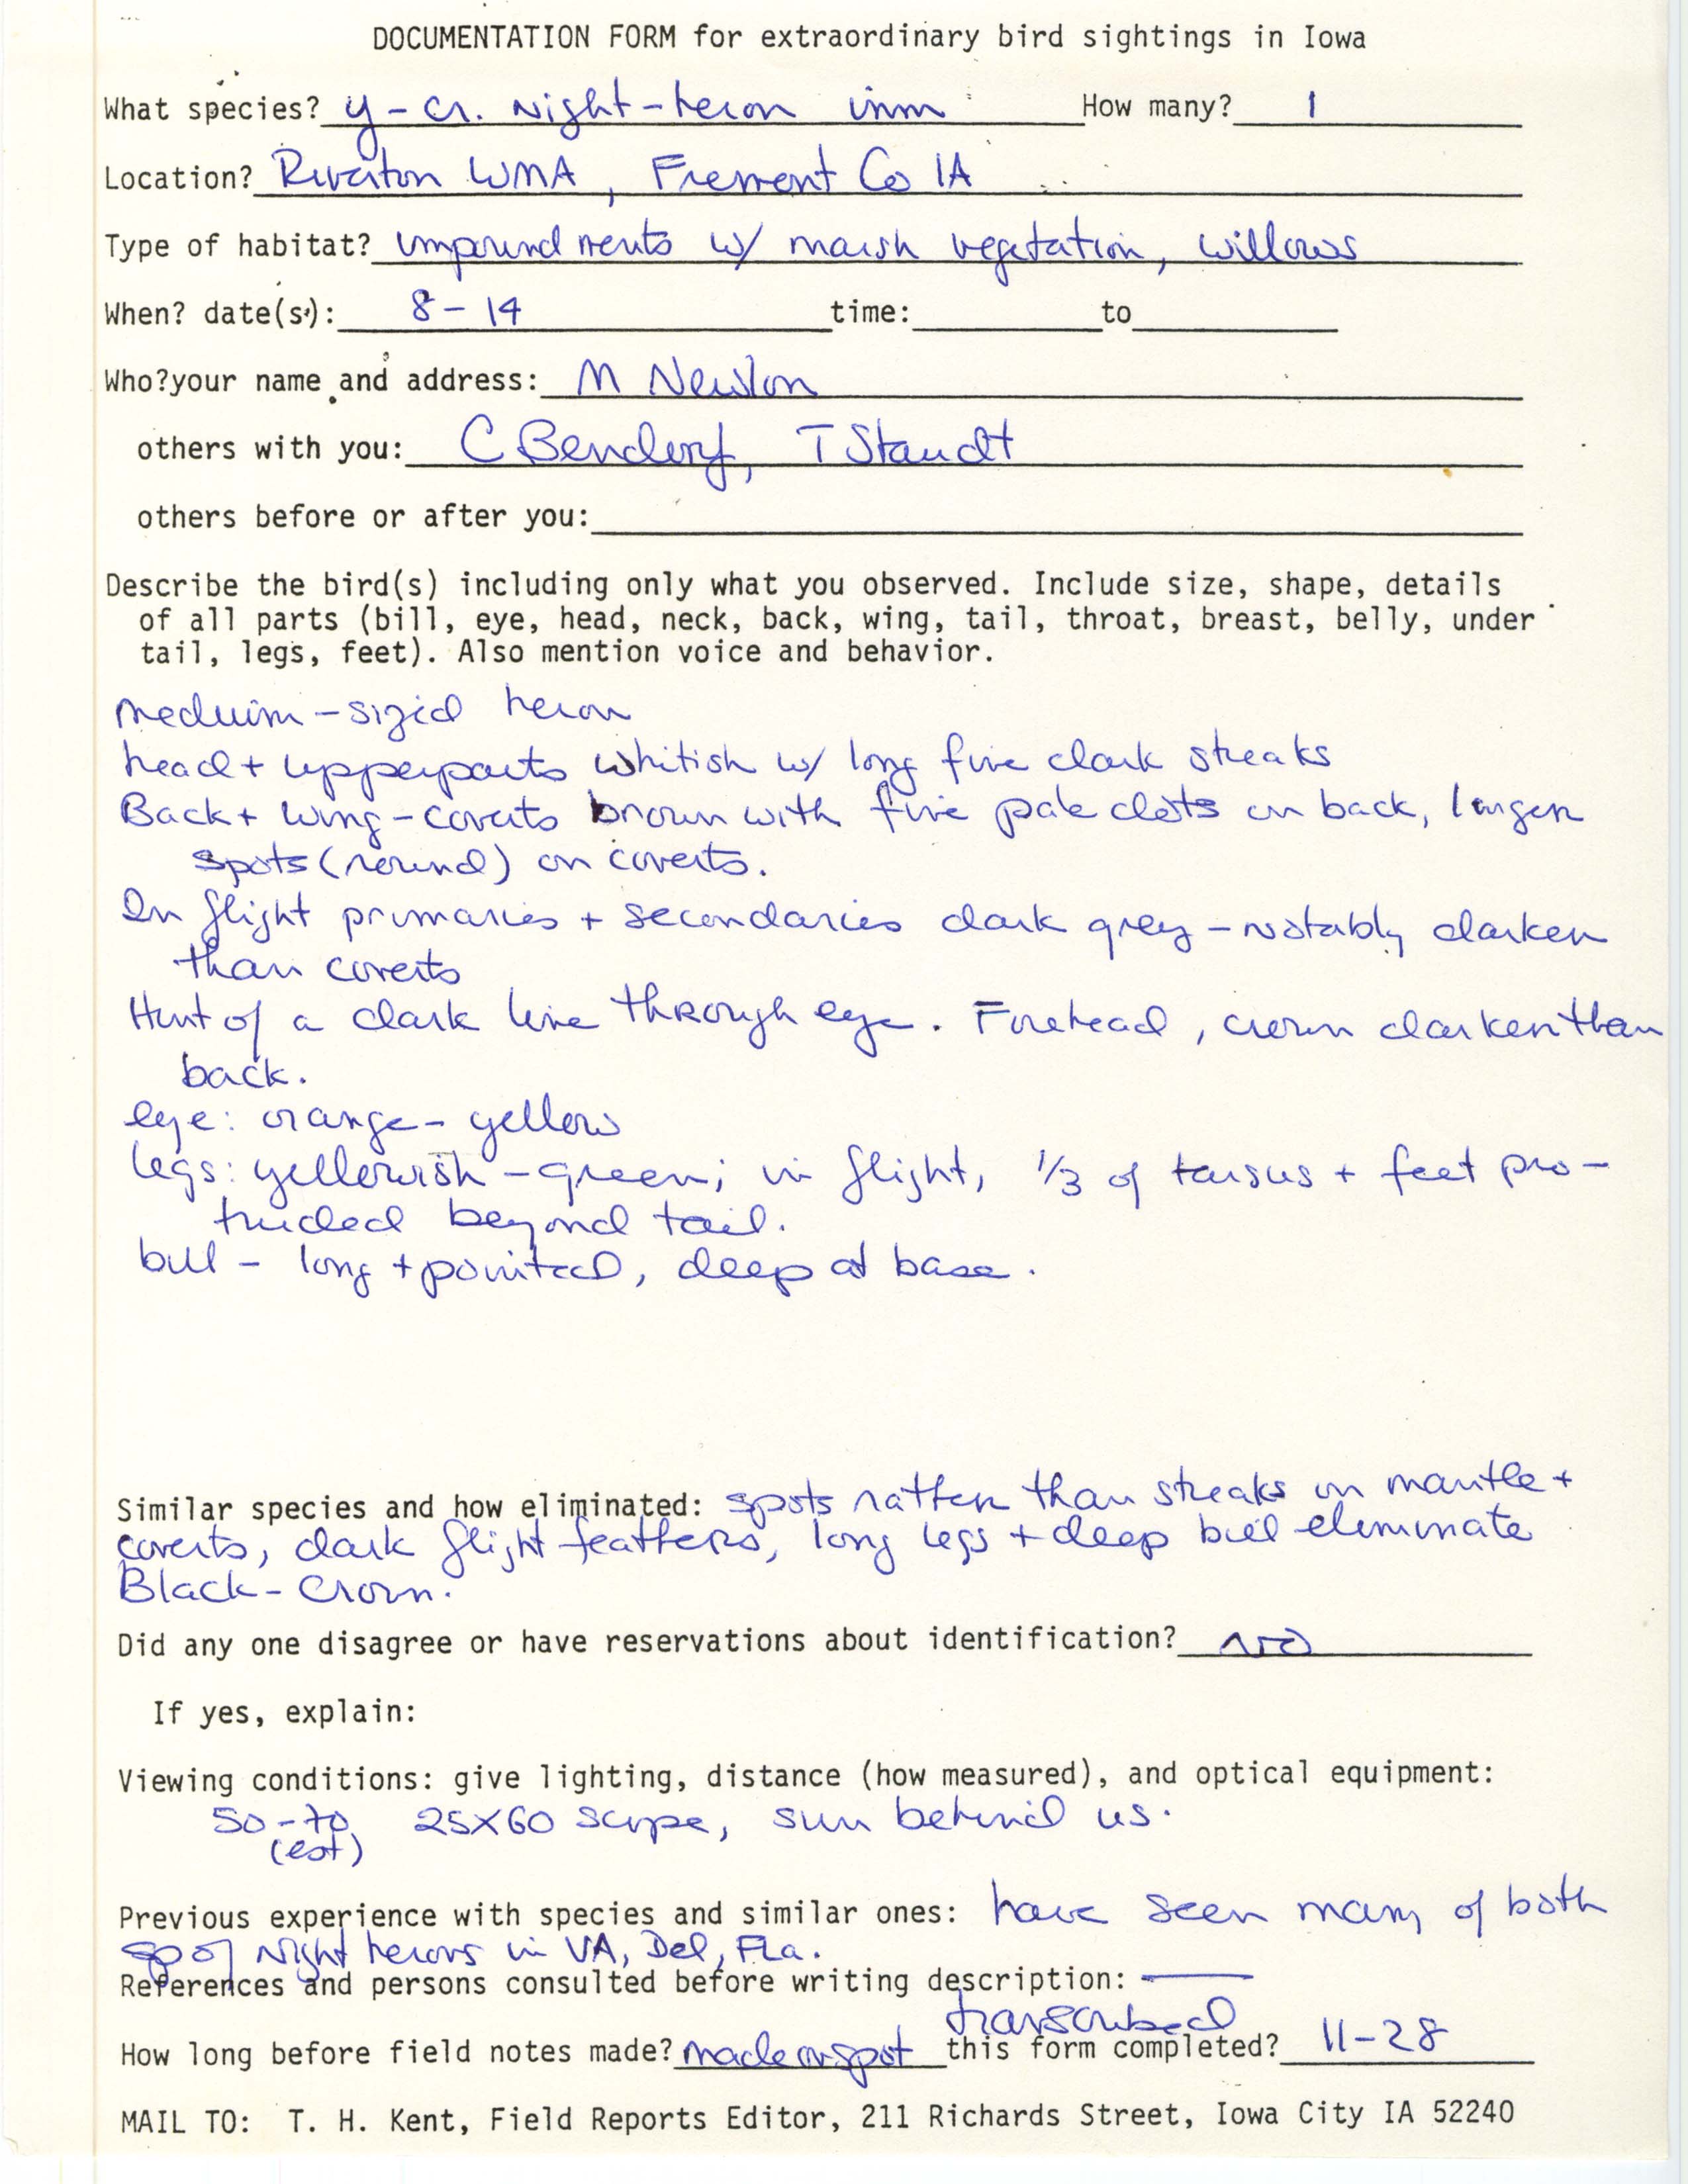 Rare bird documentation form for Yellow-crowned Night Heron at Riverton Wildlife Management Area, 1981